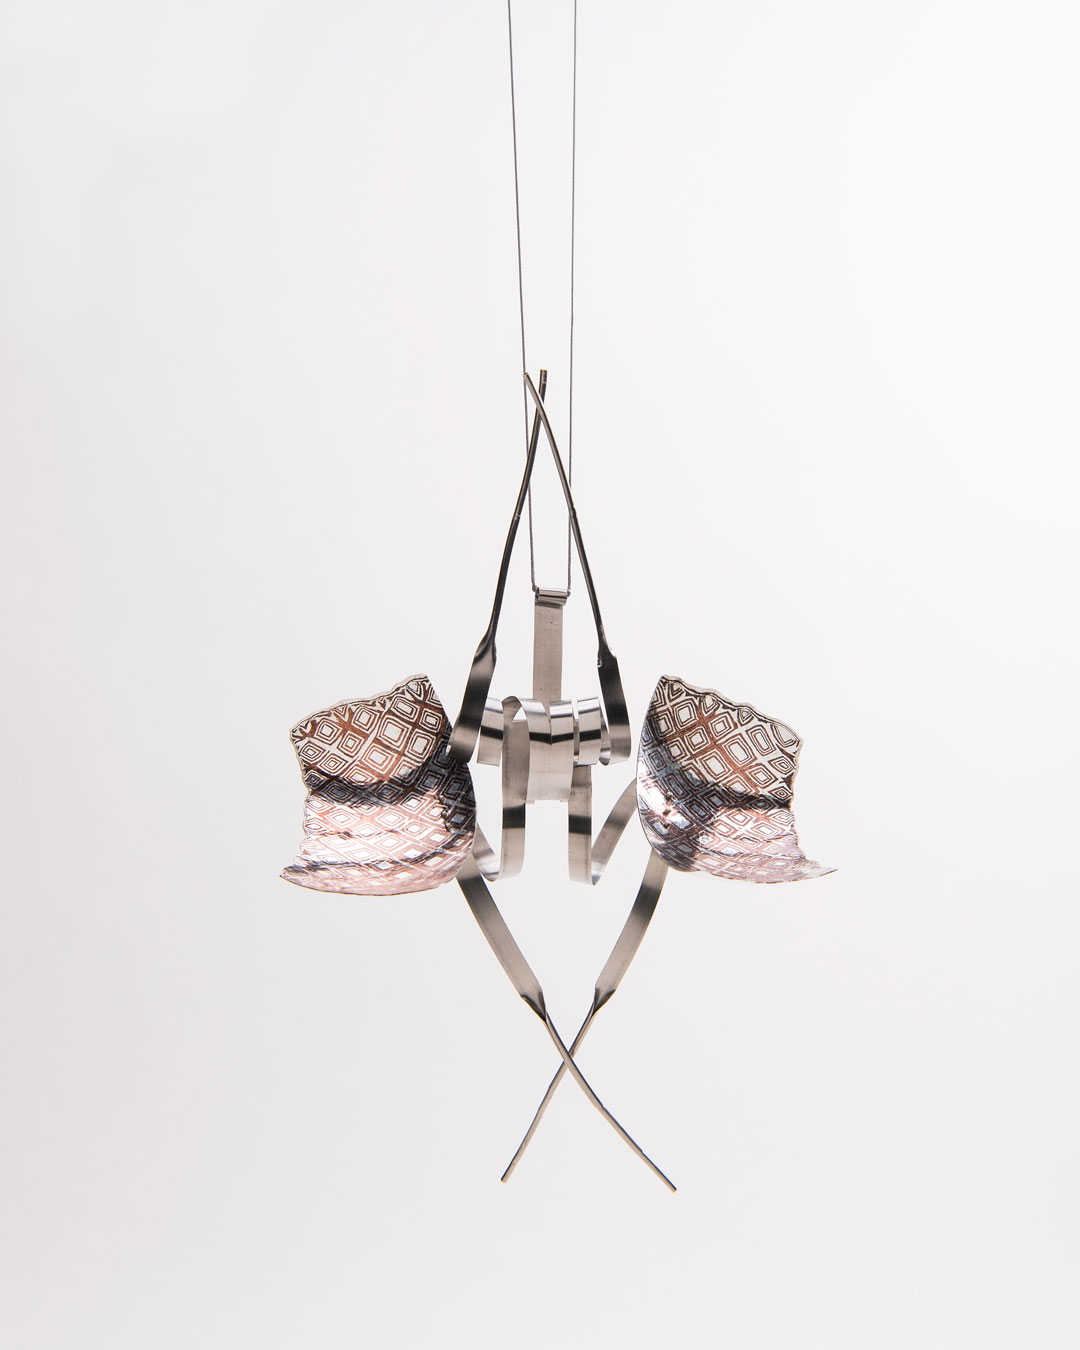 Andrea Wippermann, Mantis Religiosa, 2018, pendant; silver, copper, stainless steel, blackened silver, 180 x 120 x 65 mm, €4600